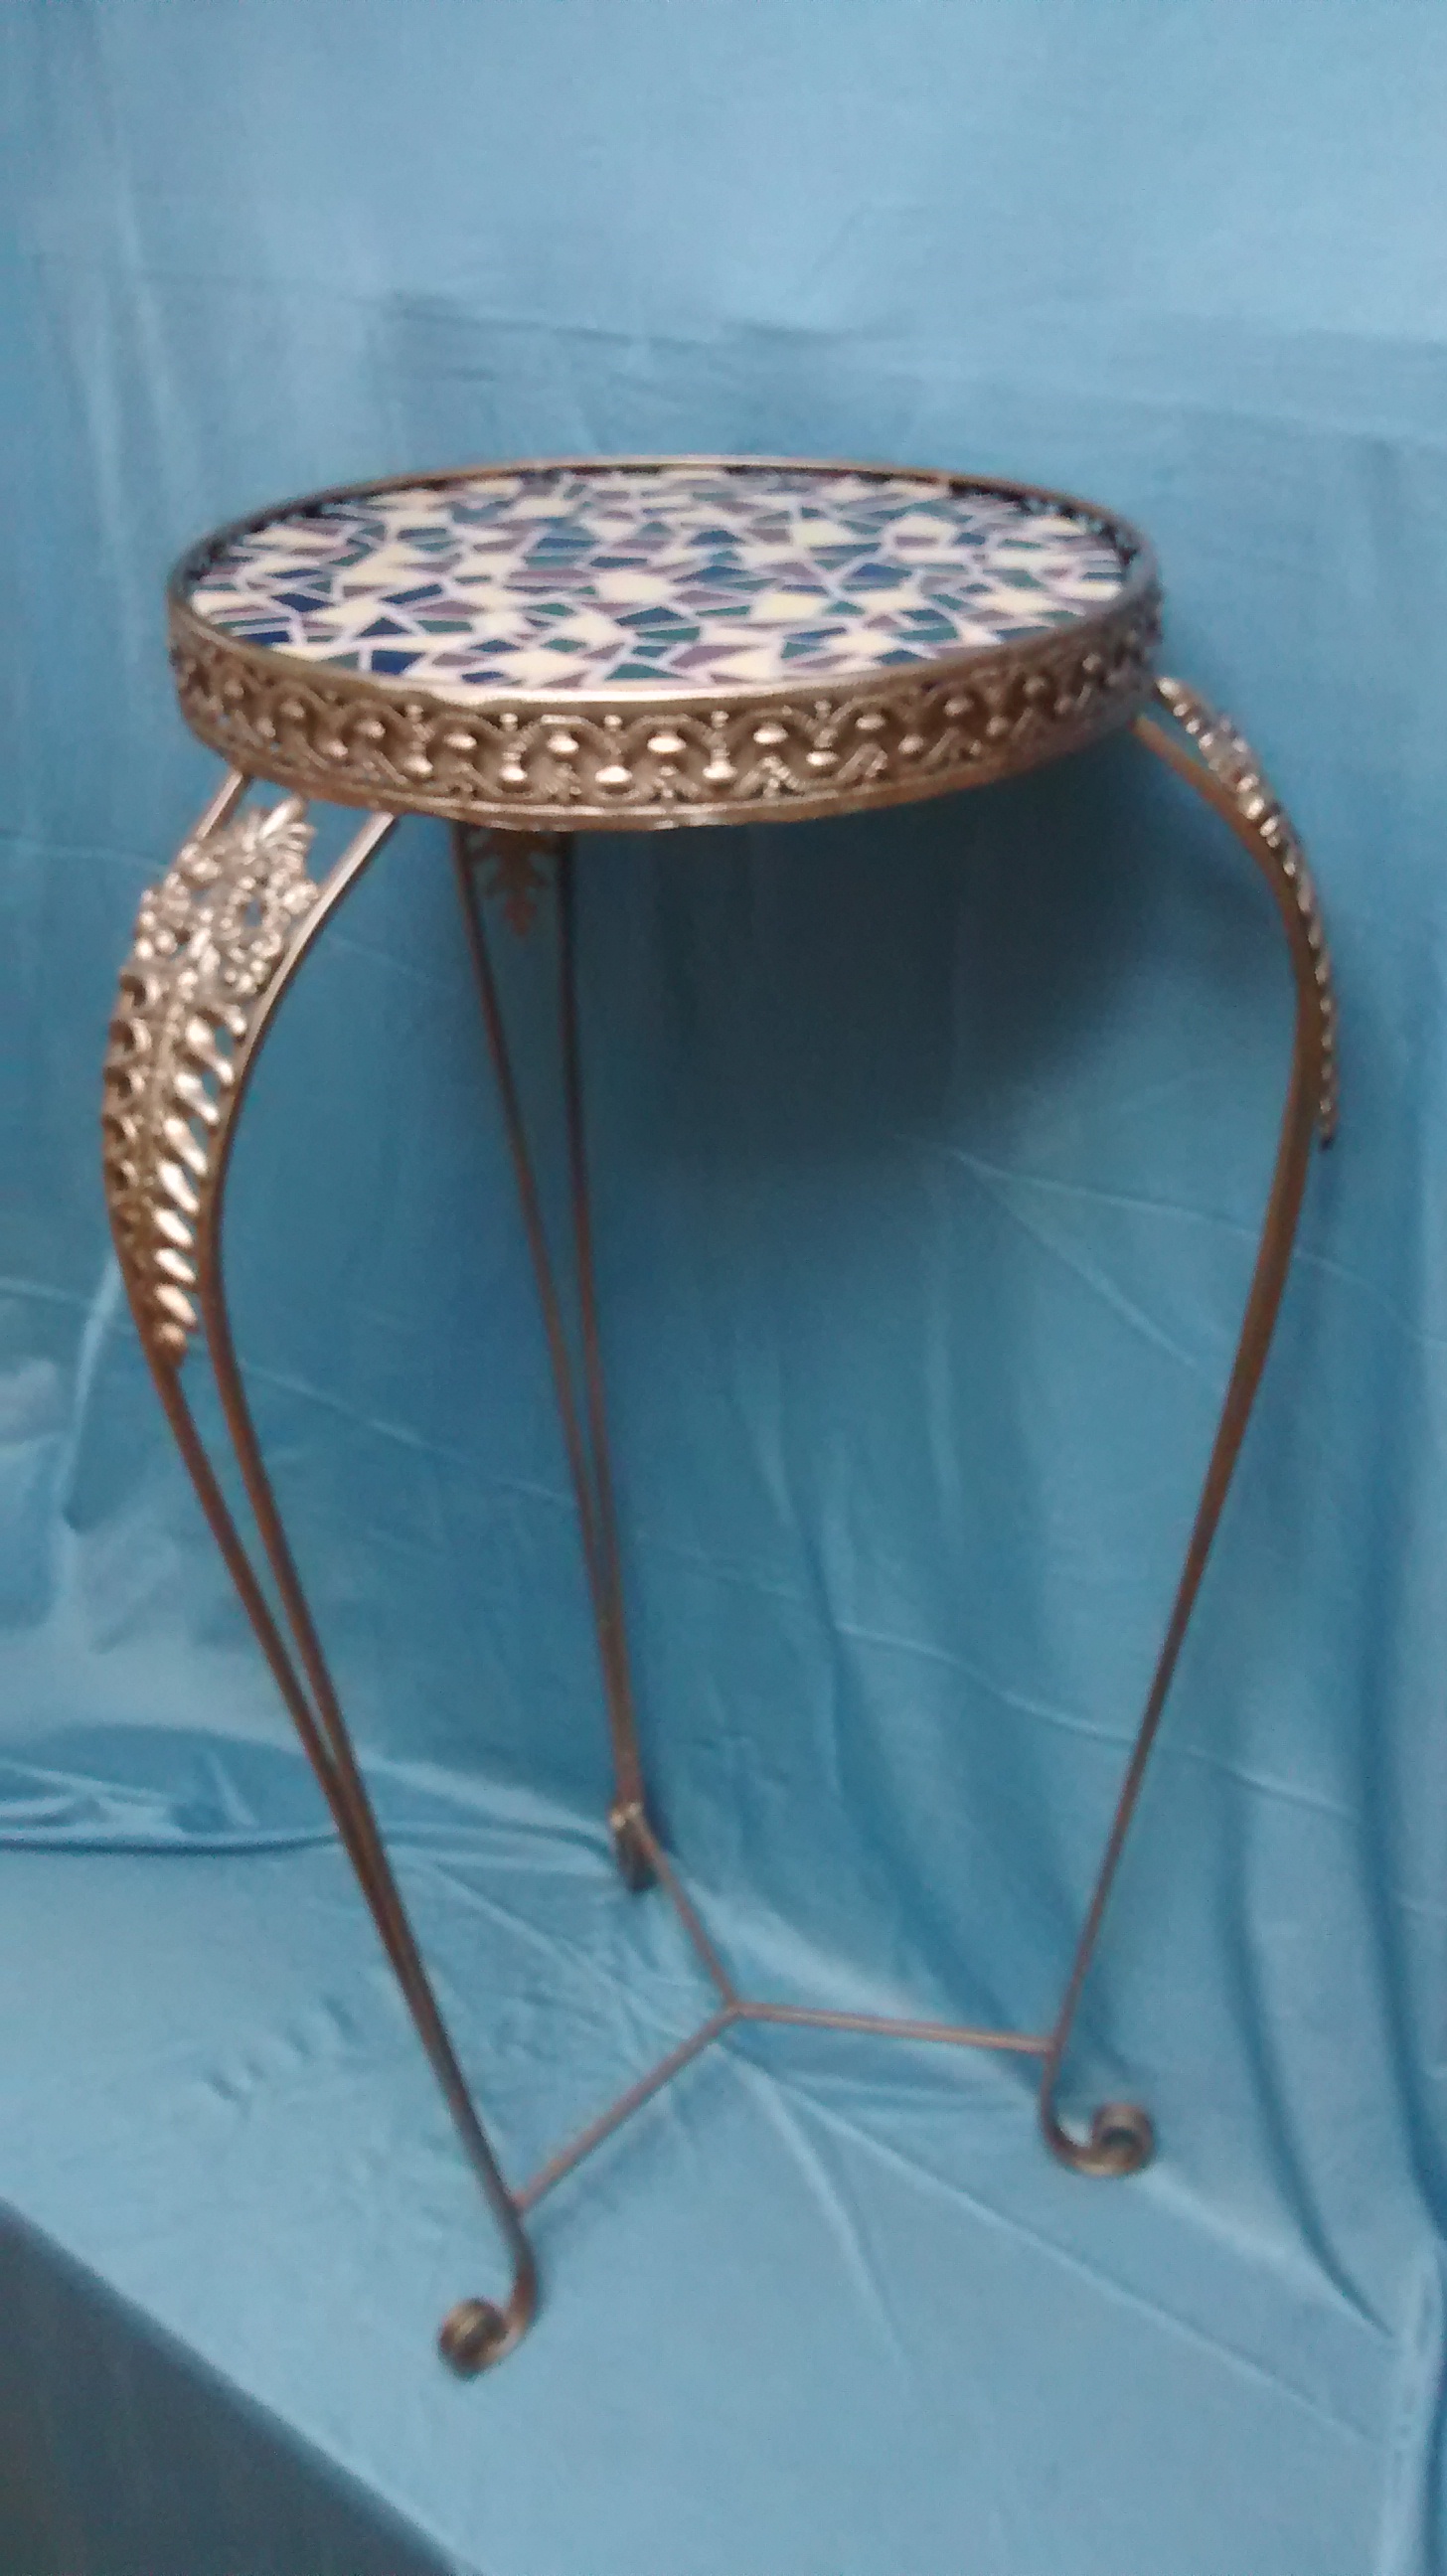 Metal Plant Stand with Colorful Mosaic Top